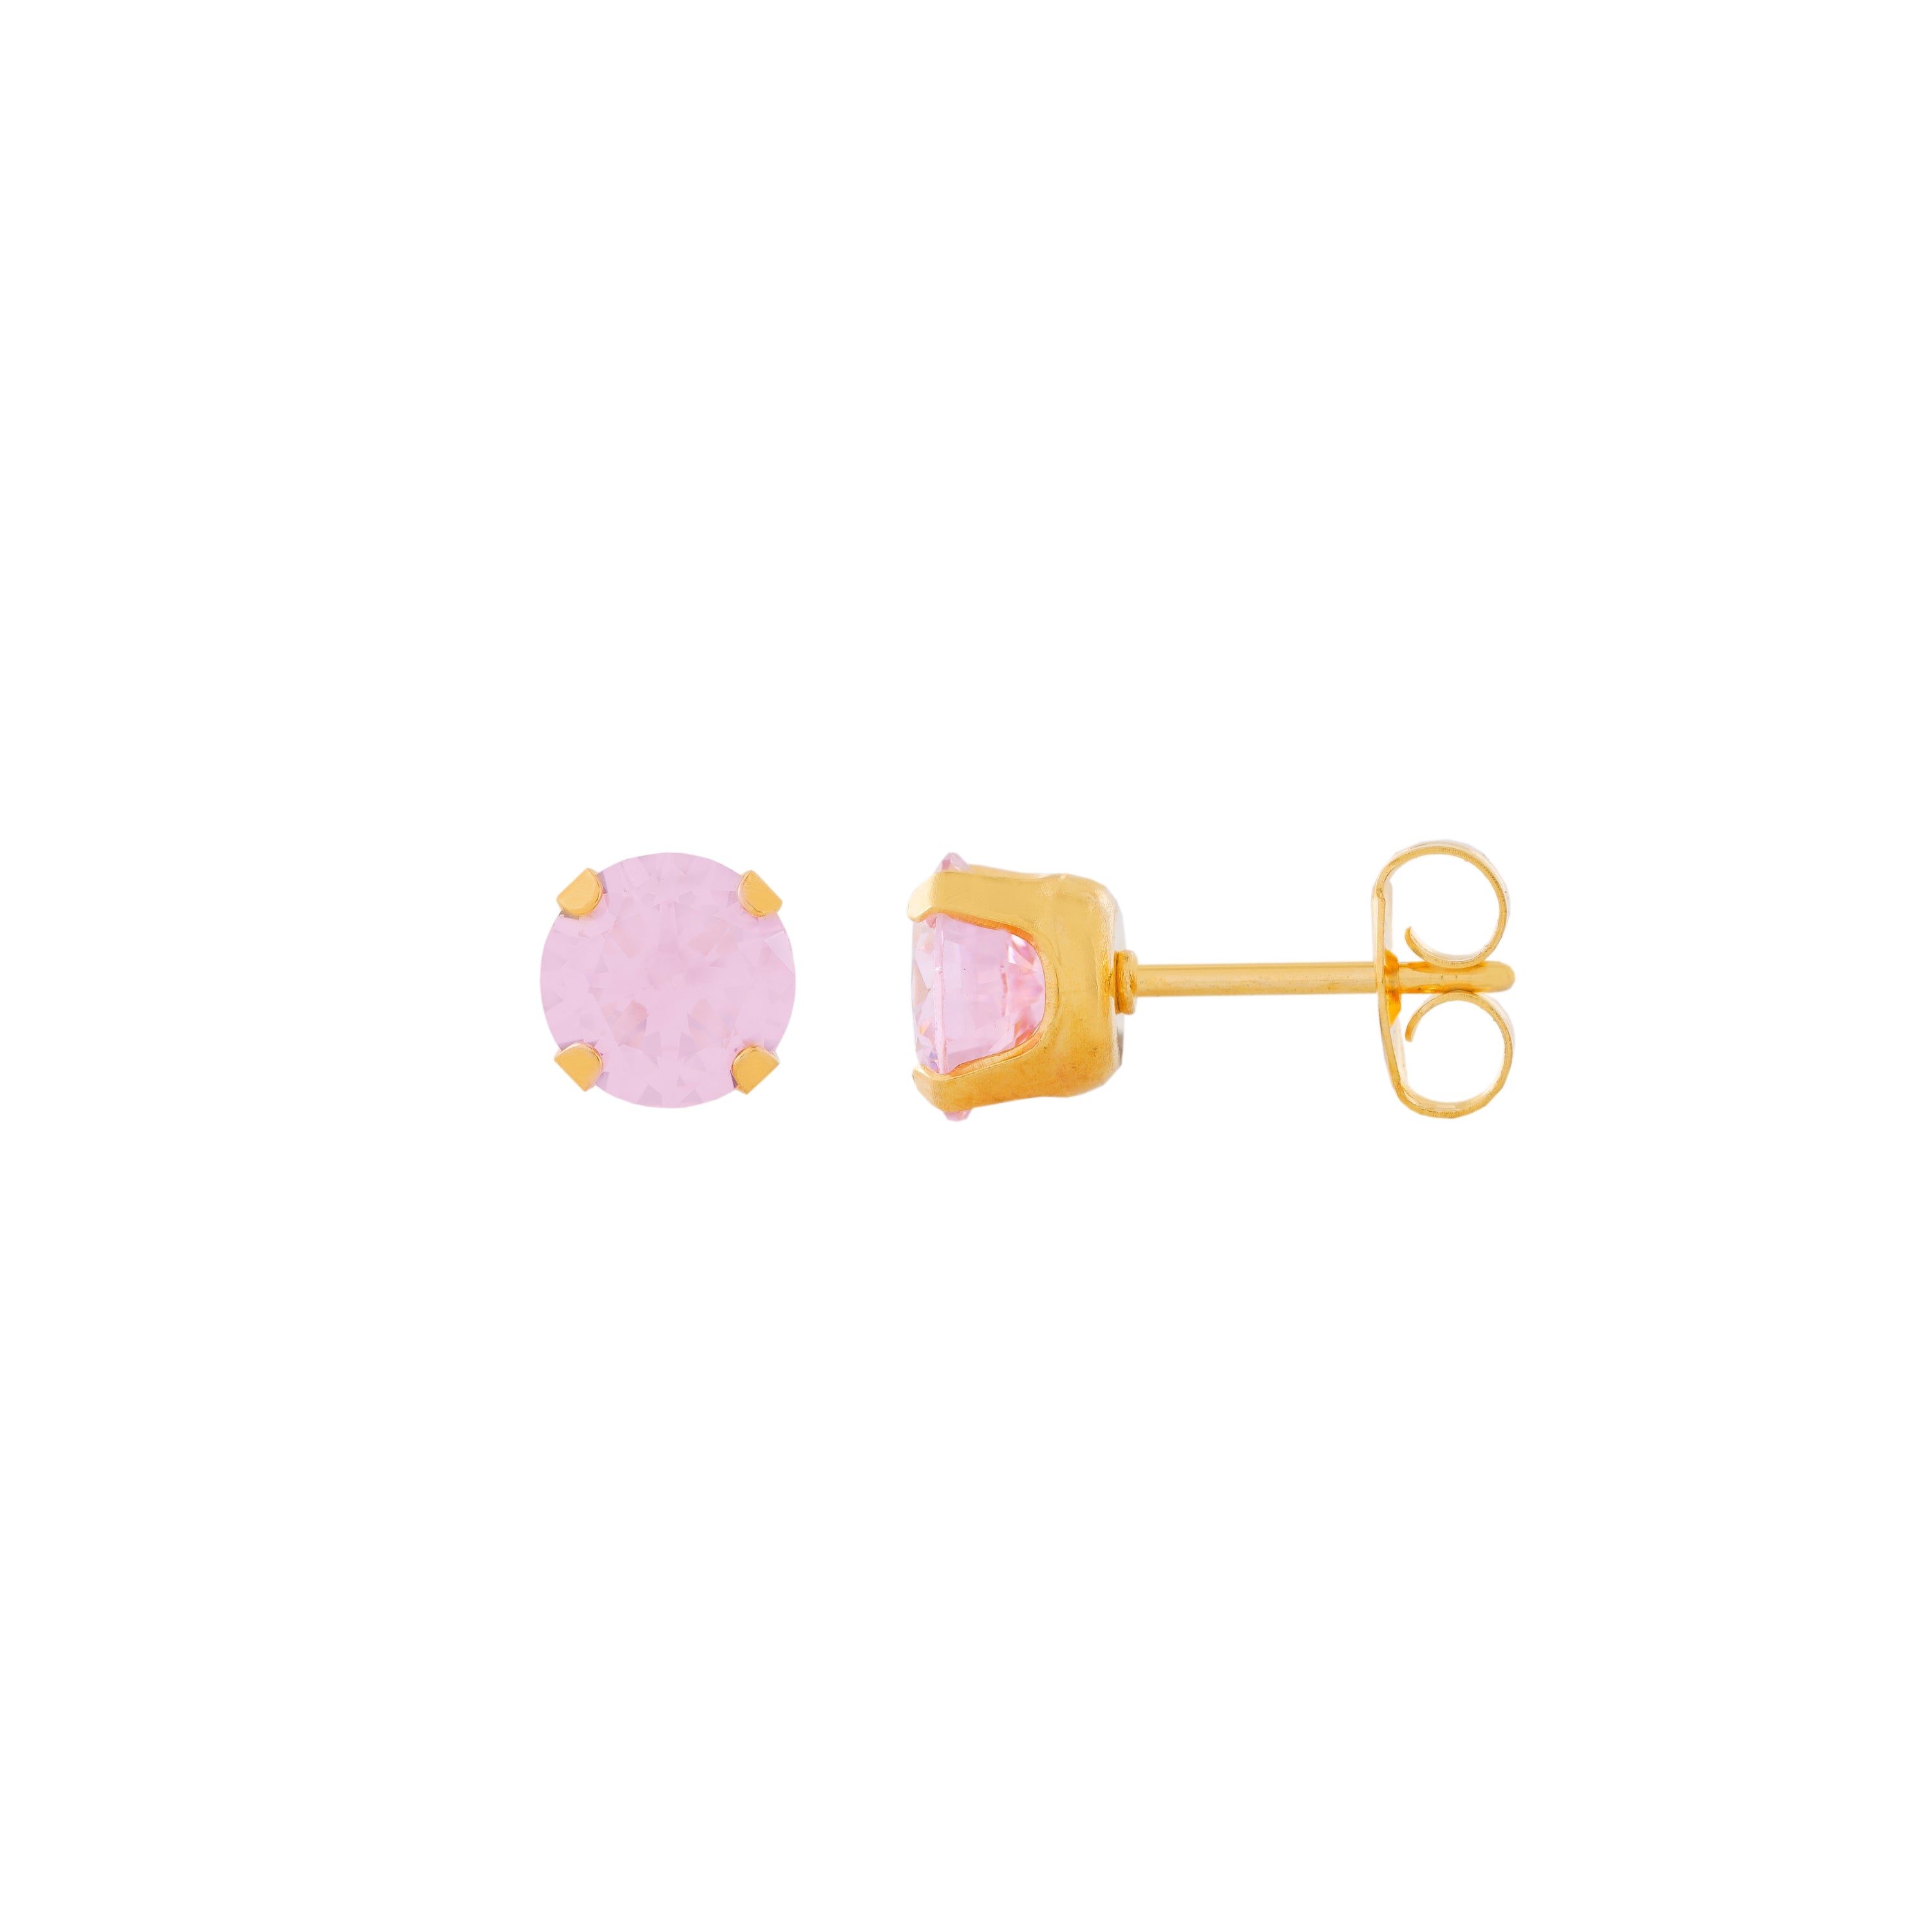 6MM Pink Cubic Zirconia 24K Pure Gold Plated Ear Studs | MADE IN USA | Ideal for everyday wear